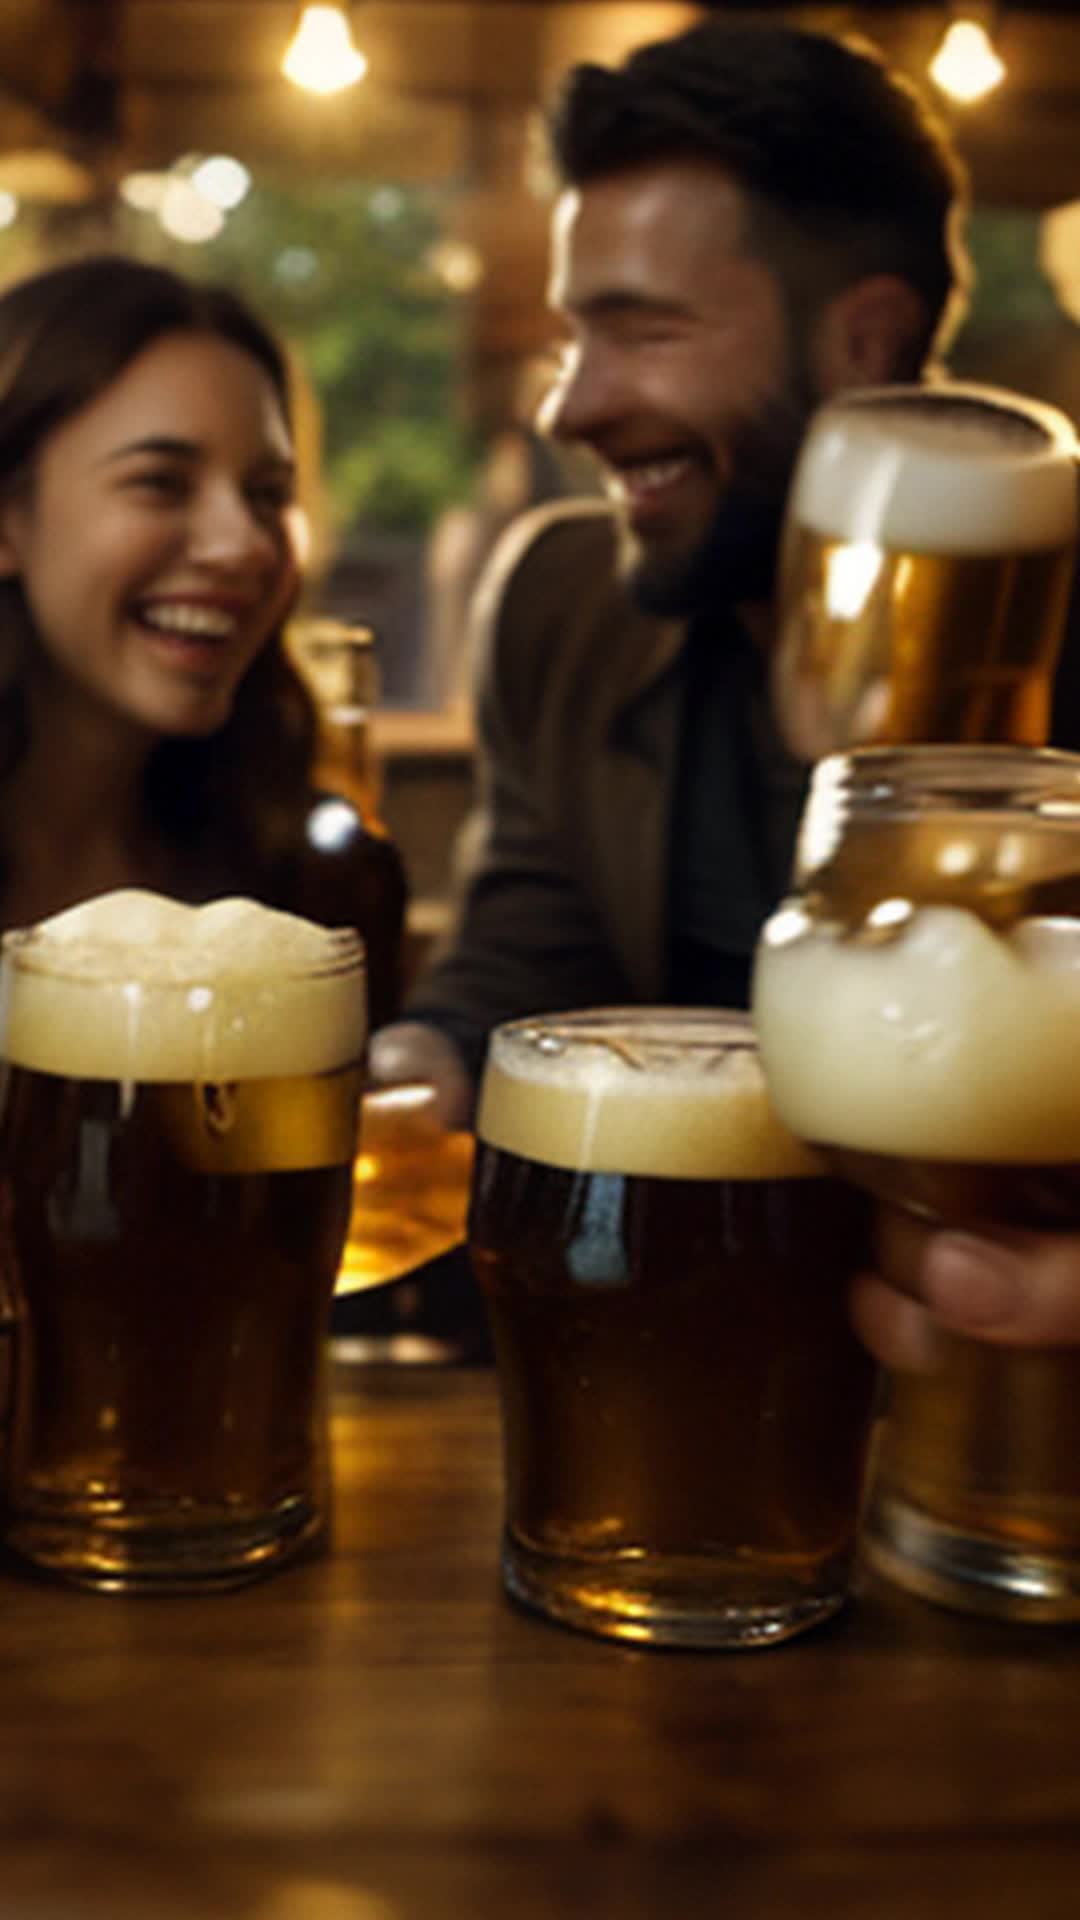 Friends excitedly clinking beer glasses, discovery celebration, perfect scenic backdrops, stories and laughter, lush alcove ambiance, wide-angle shot, soft, natural lighting